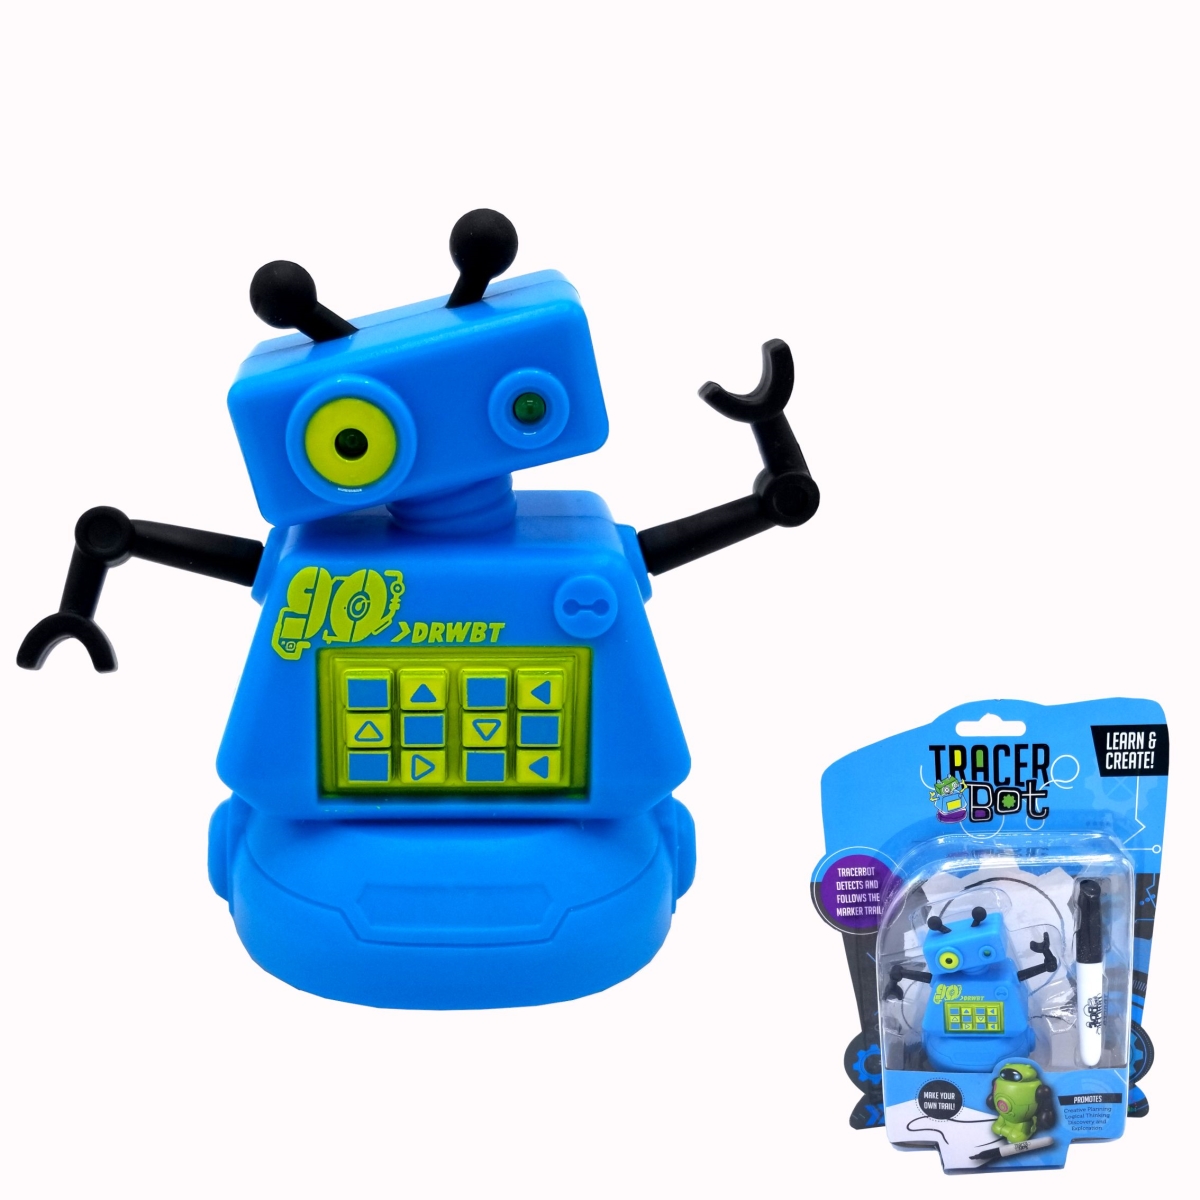 Picture of Mukikim MUK-DB31 Tracerbot Mini Inductive Robot Toy - Blue